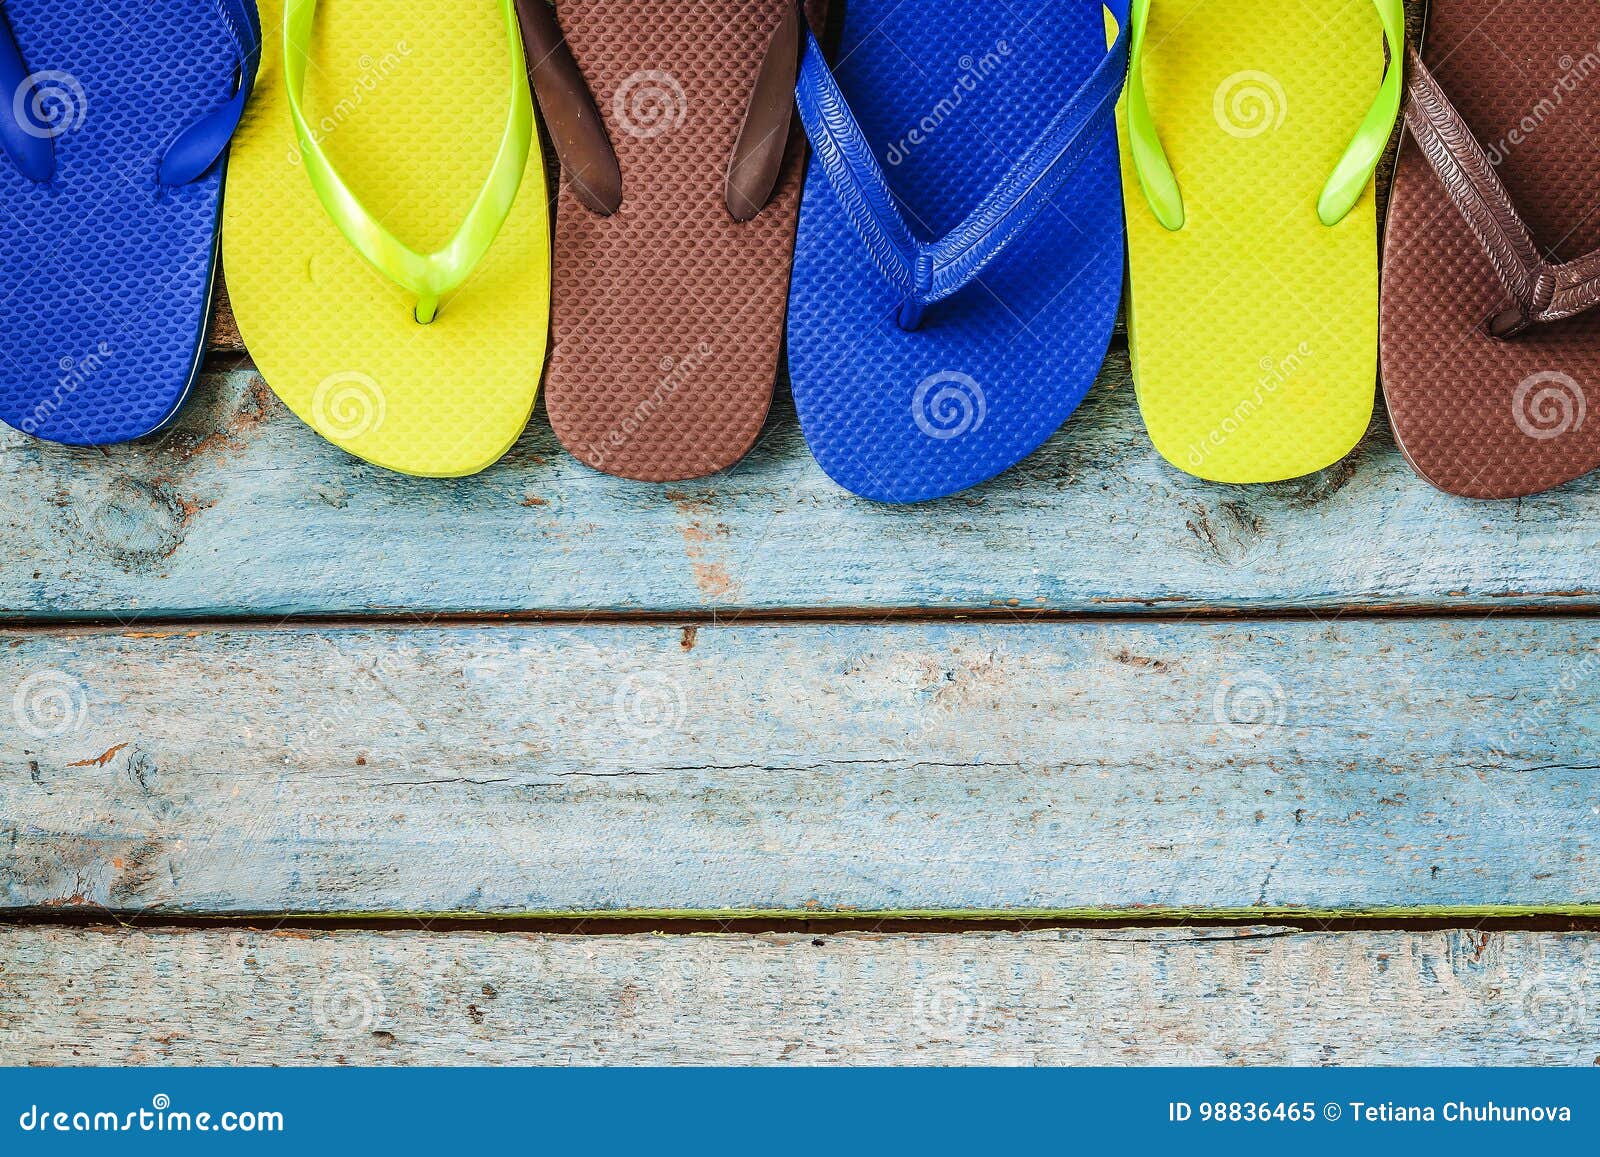 Several Pairs of Multi-colored Rubber Flip-flops Exhibited in a Stock ...